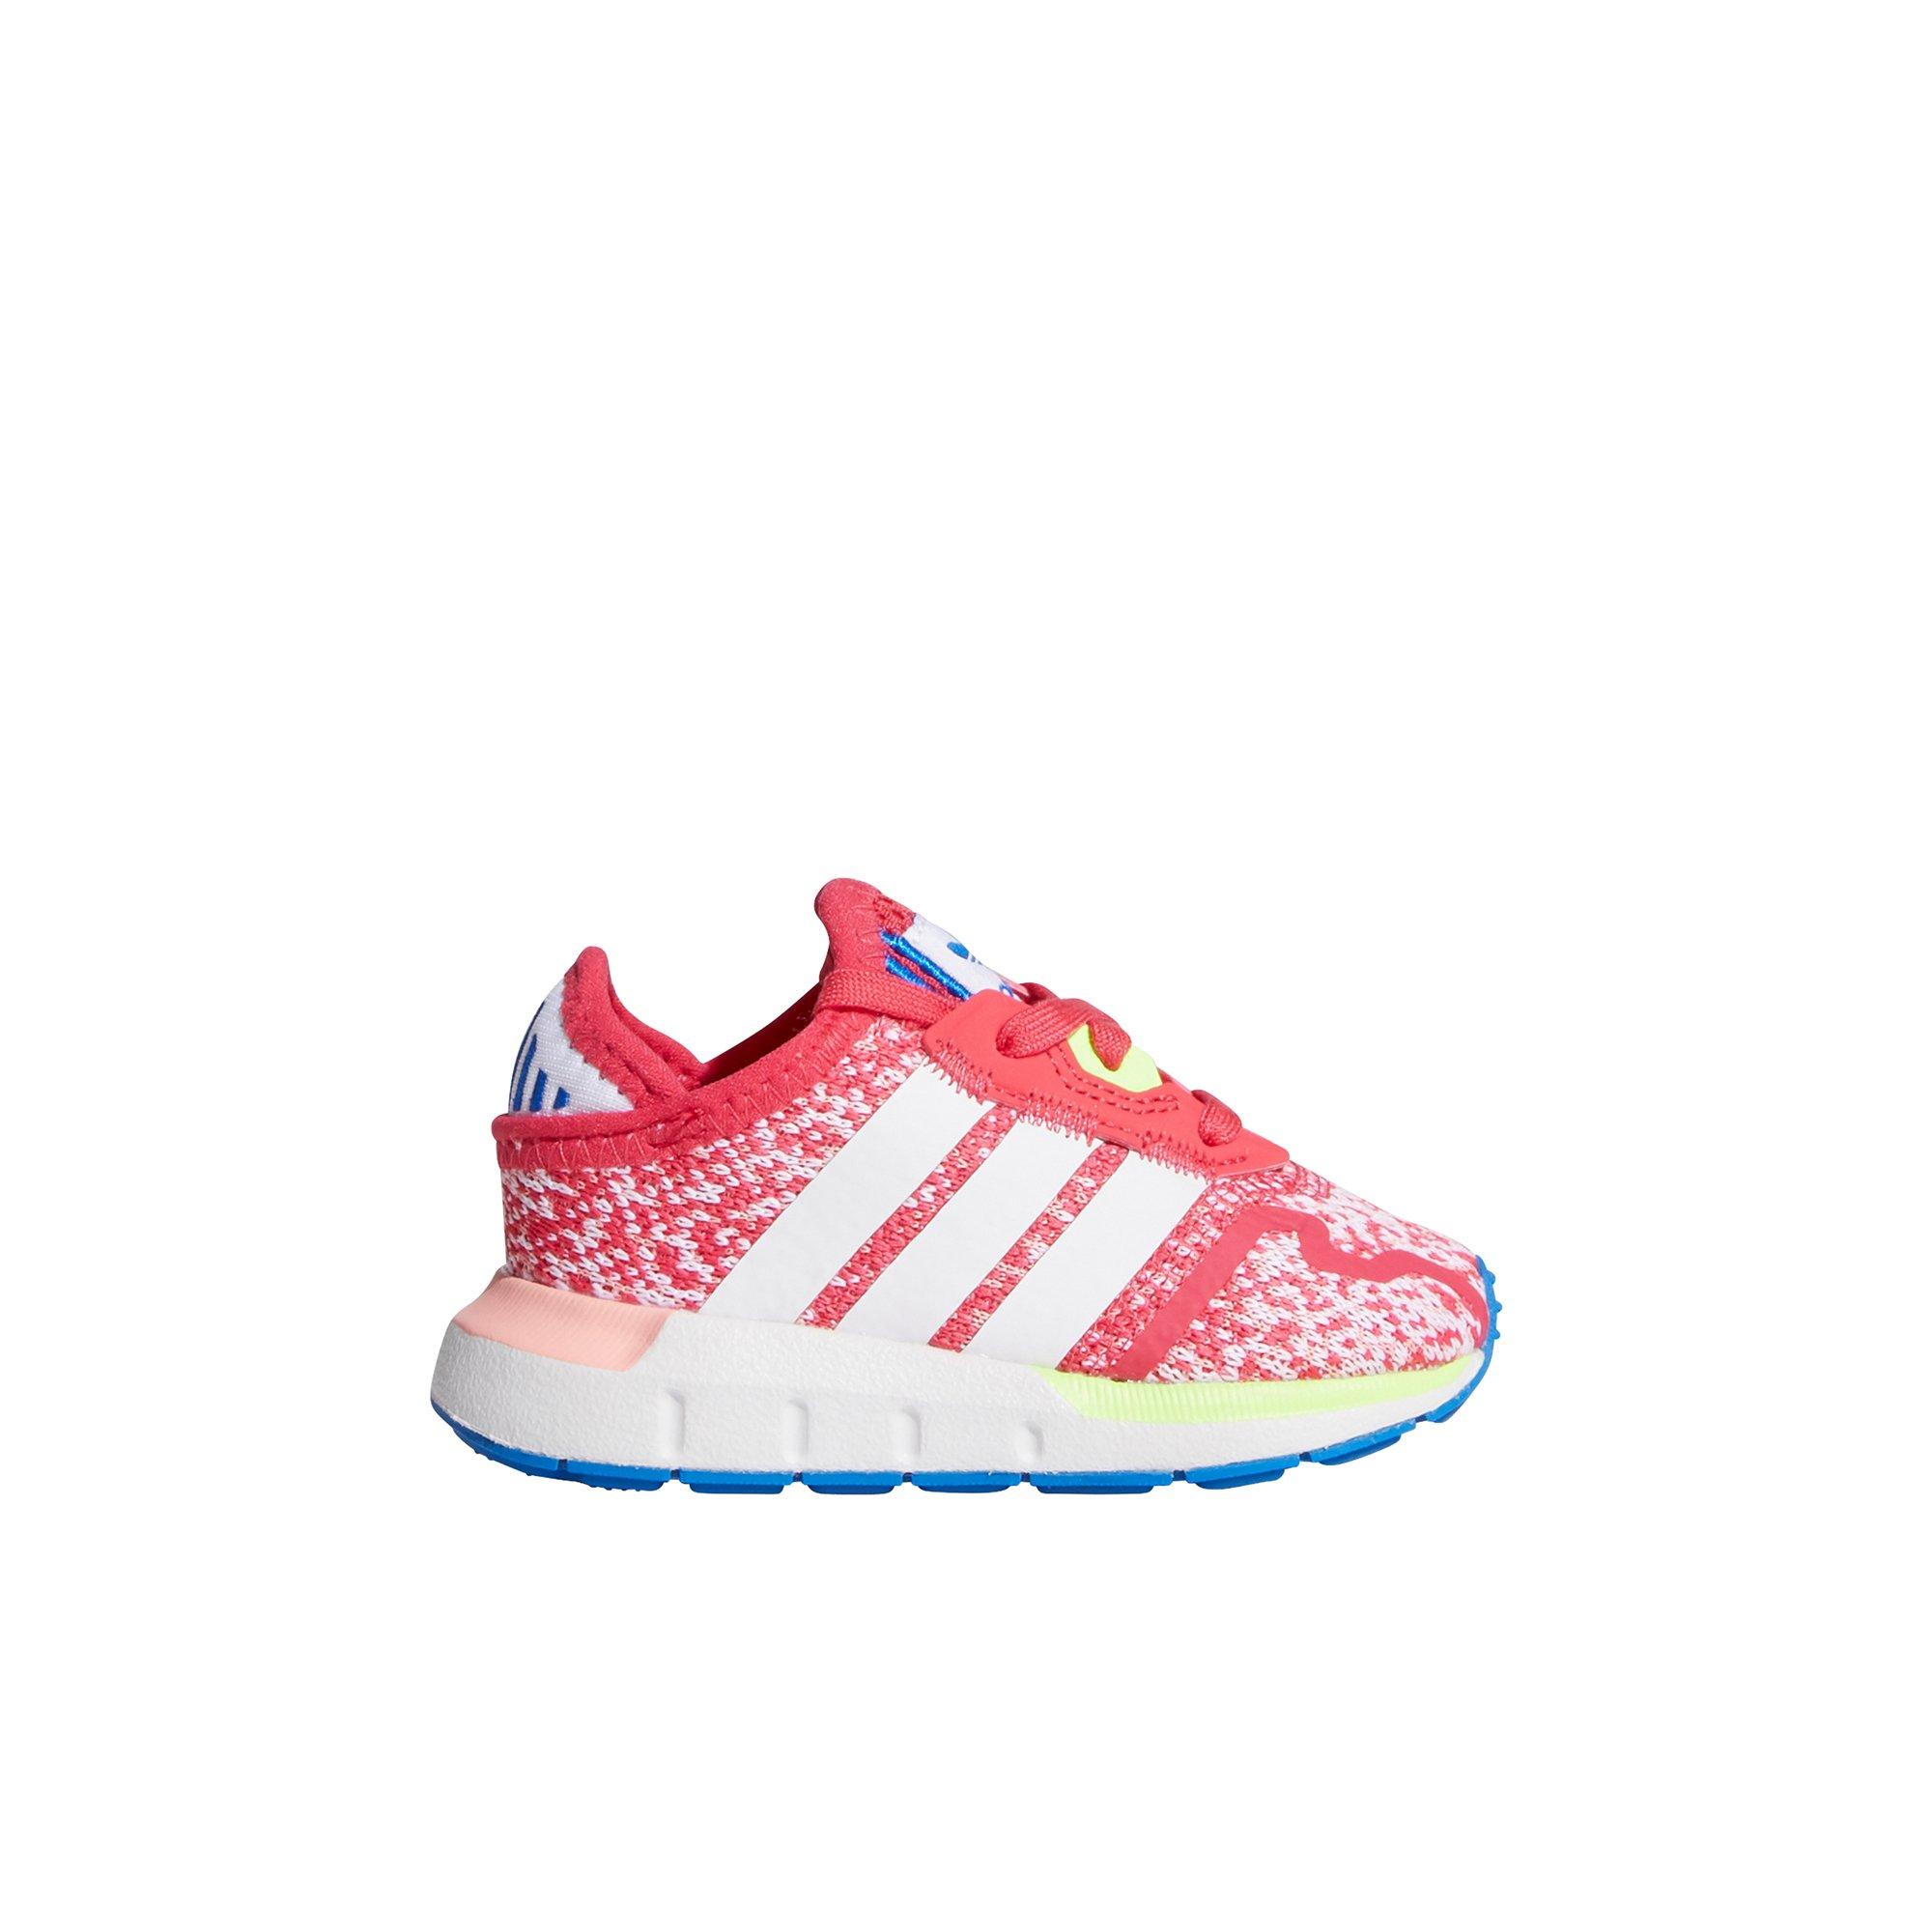 adidas pink baby shoes